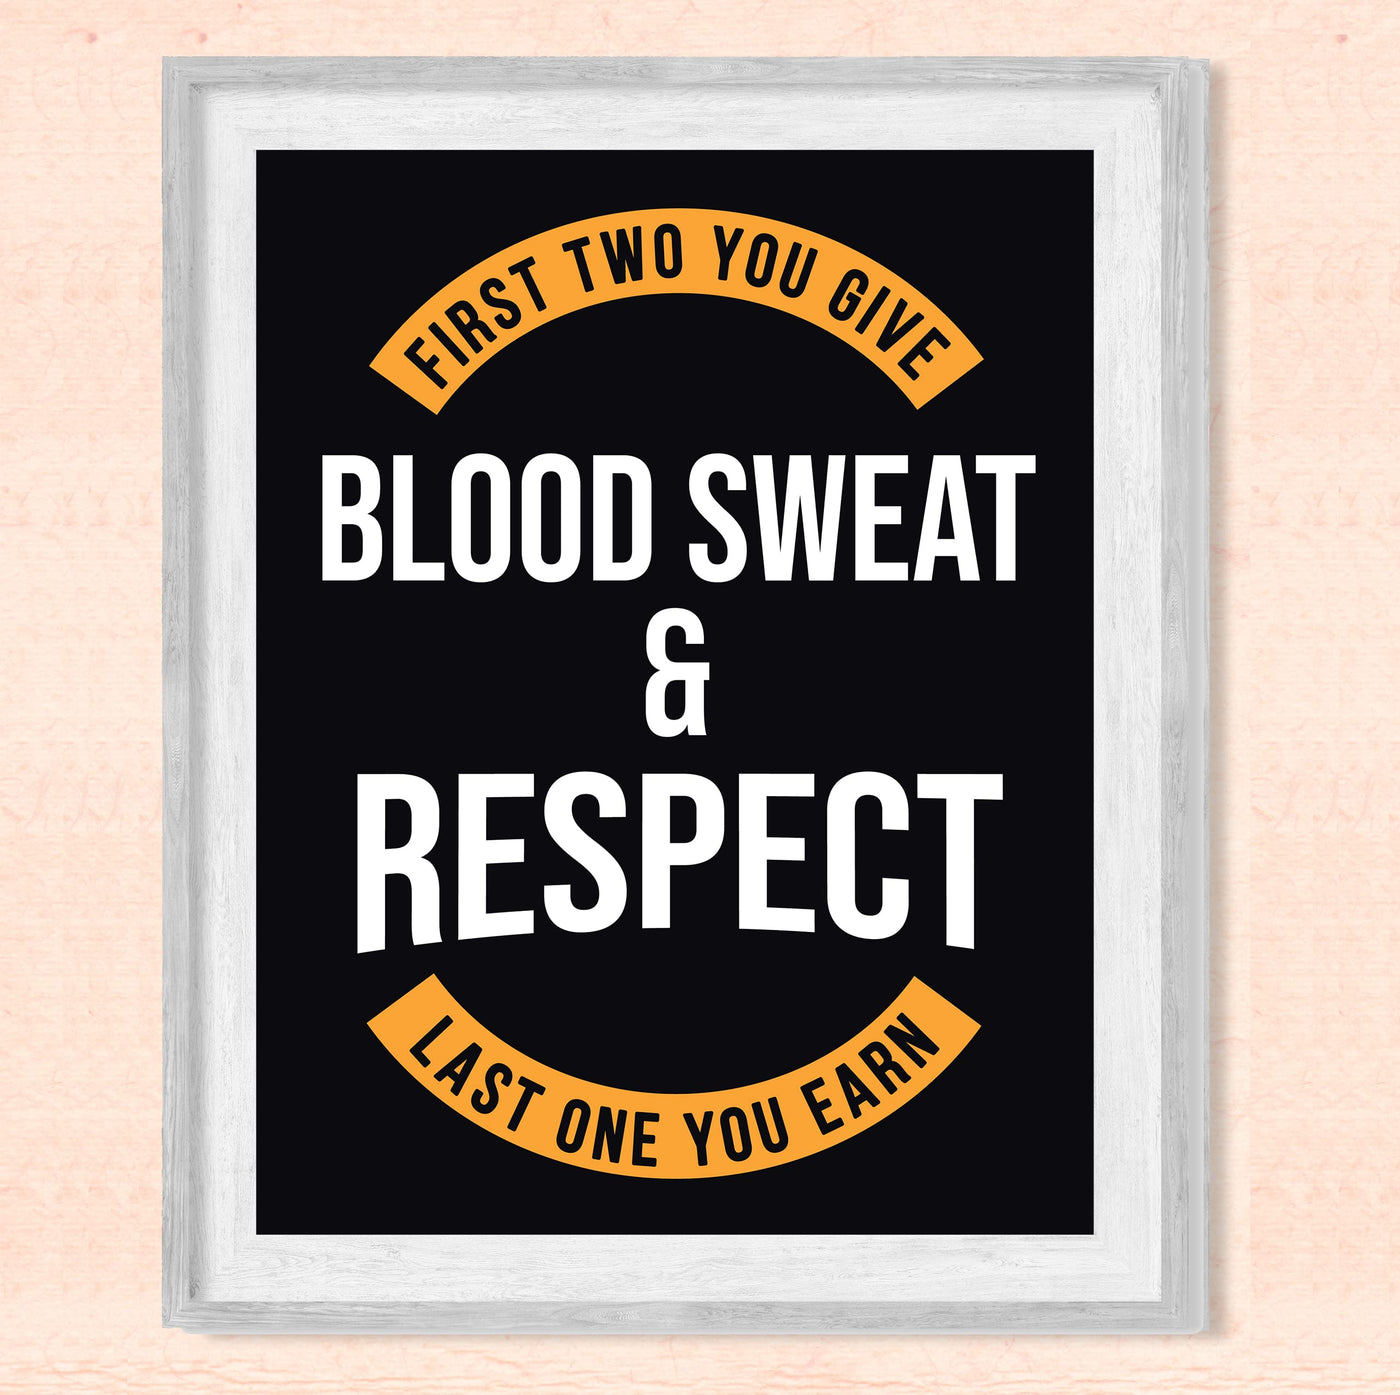 Blood, Sweat, & Respect-Last One You Earn Motivational Quotes Wall Art -8 x 10" Inspirational Exercise & Fitness Print-Ready to Frame. Modern Home-Office-School-Gym Decor. Great Gift of Motivation!